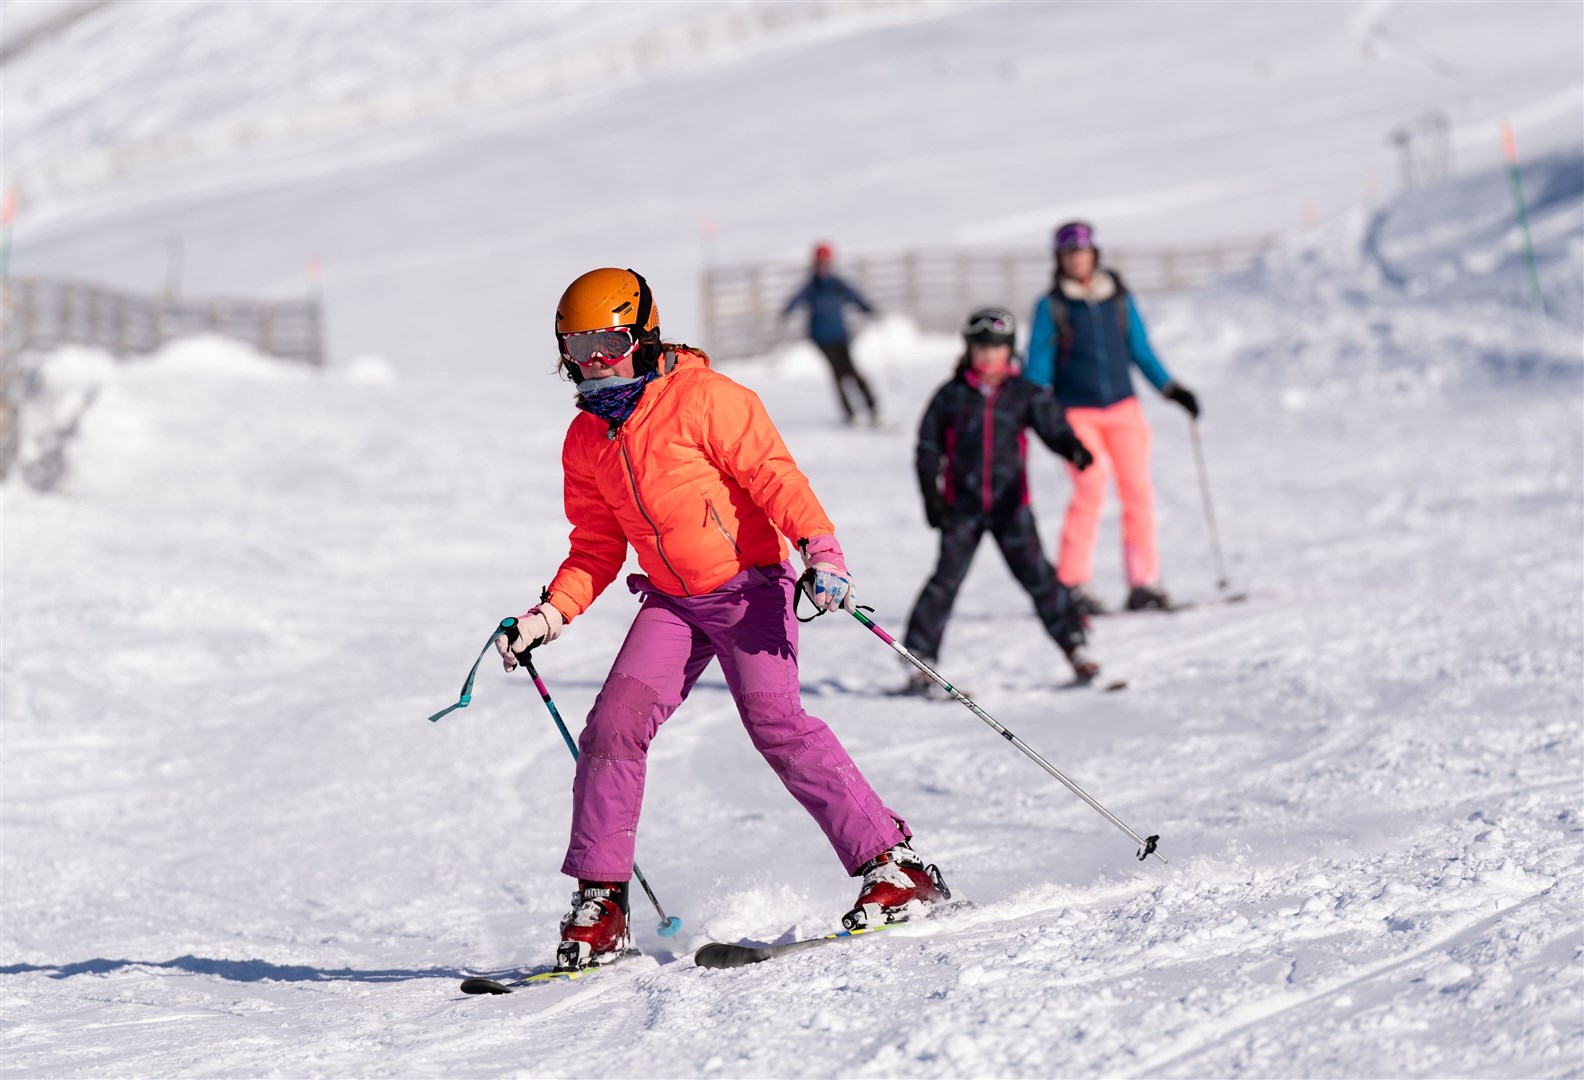 Enjoying some skiing at Cairngorm Mountain. Picture: Paul Masson.